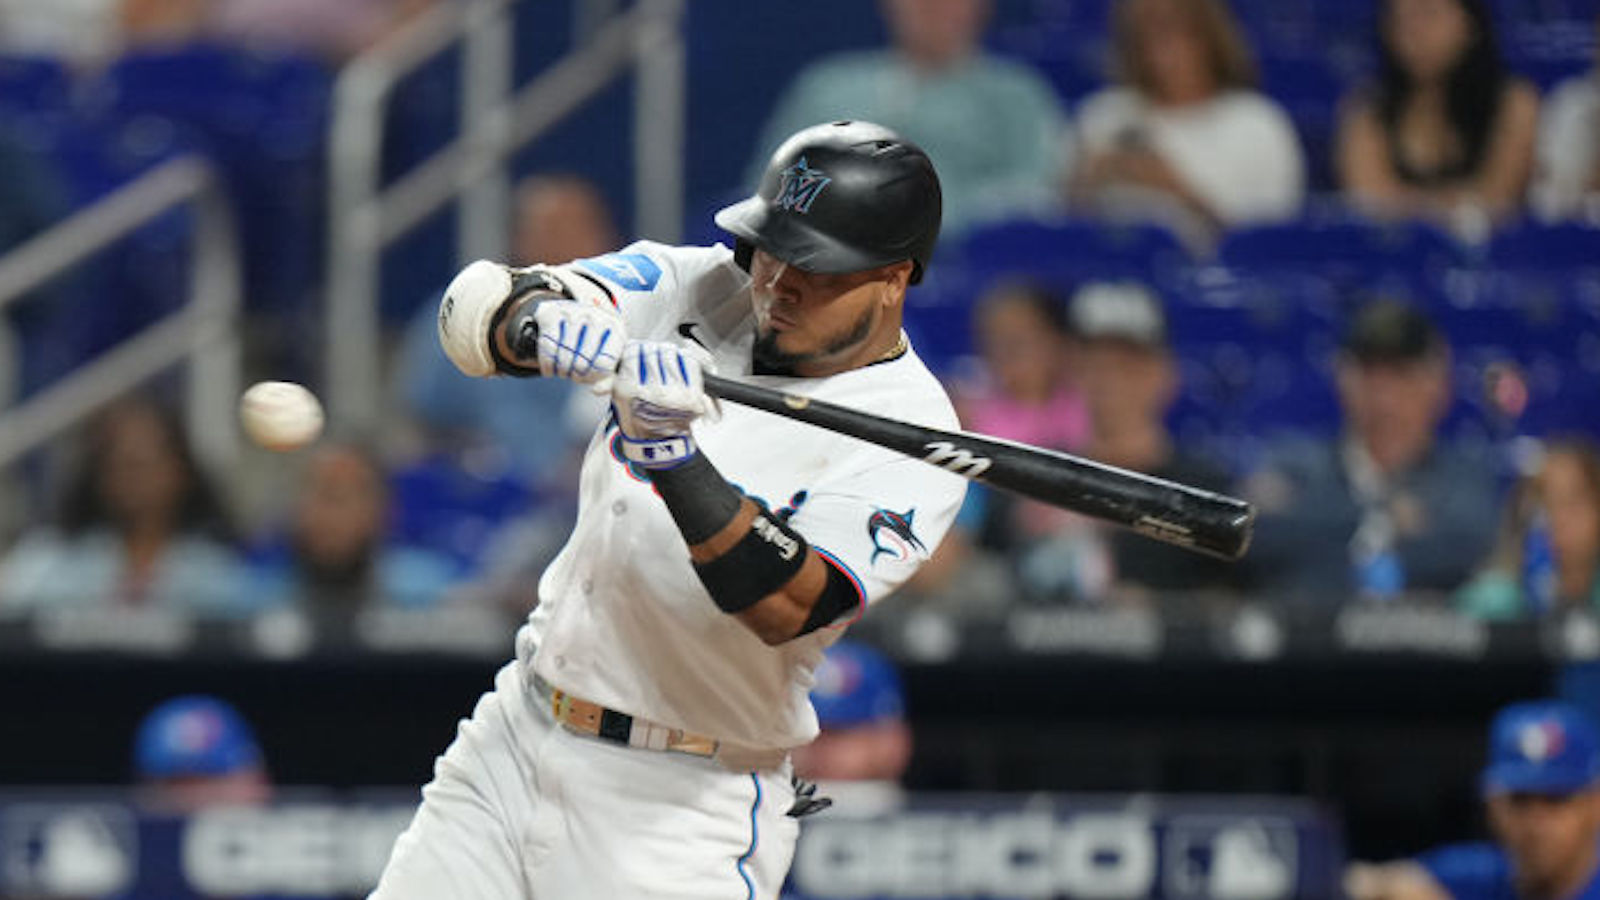 Miami Marlins second baseman Luis Arraez (3) connects to go five for five in the seventh inning during the game between the Toronto Blue Jays and the Miami Marlins on Monday, June 19, 2023 at LoanDepot Part in Miami, Fla.